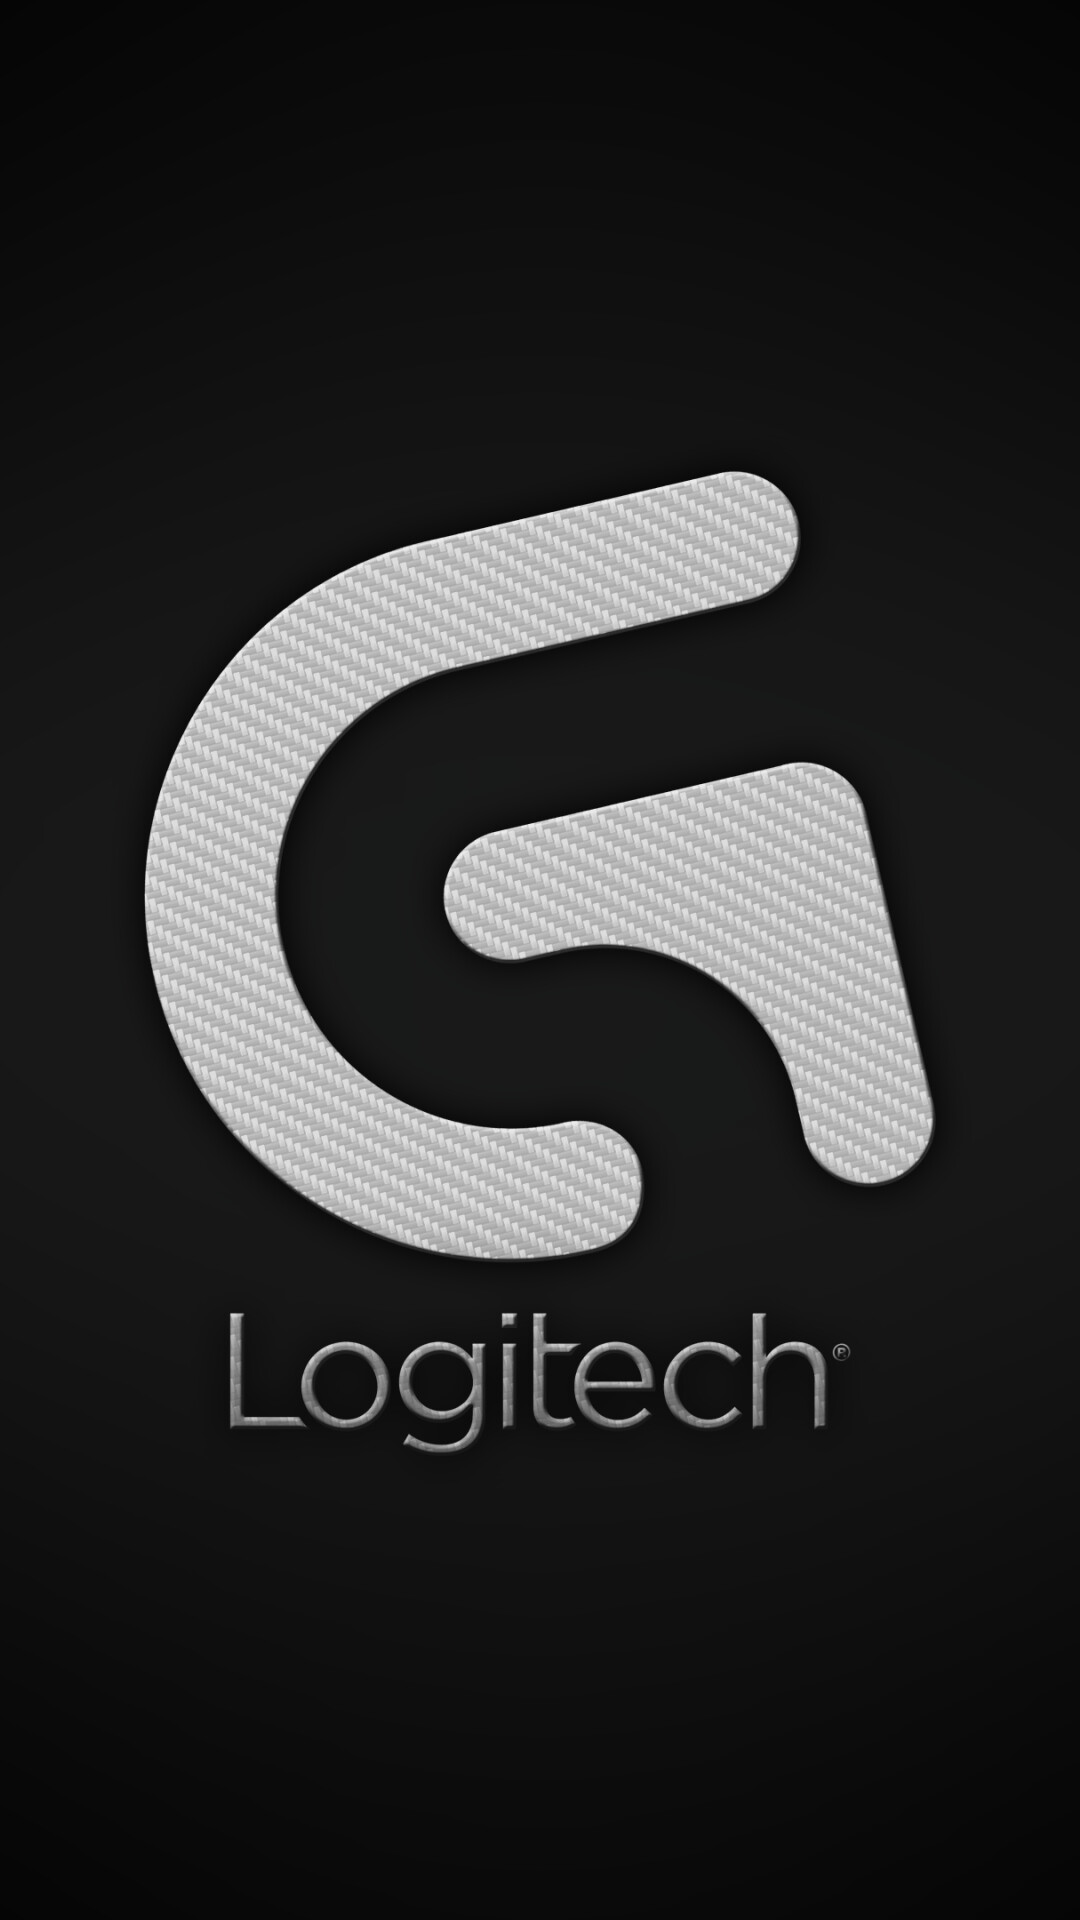 Logitech brand, High-quality image, Stylish logo, Prominent placement, 1080x1920 Full HD Phone